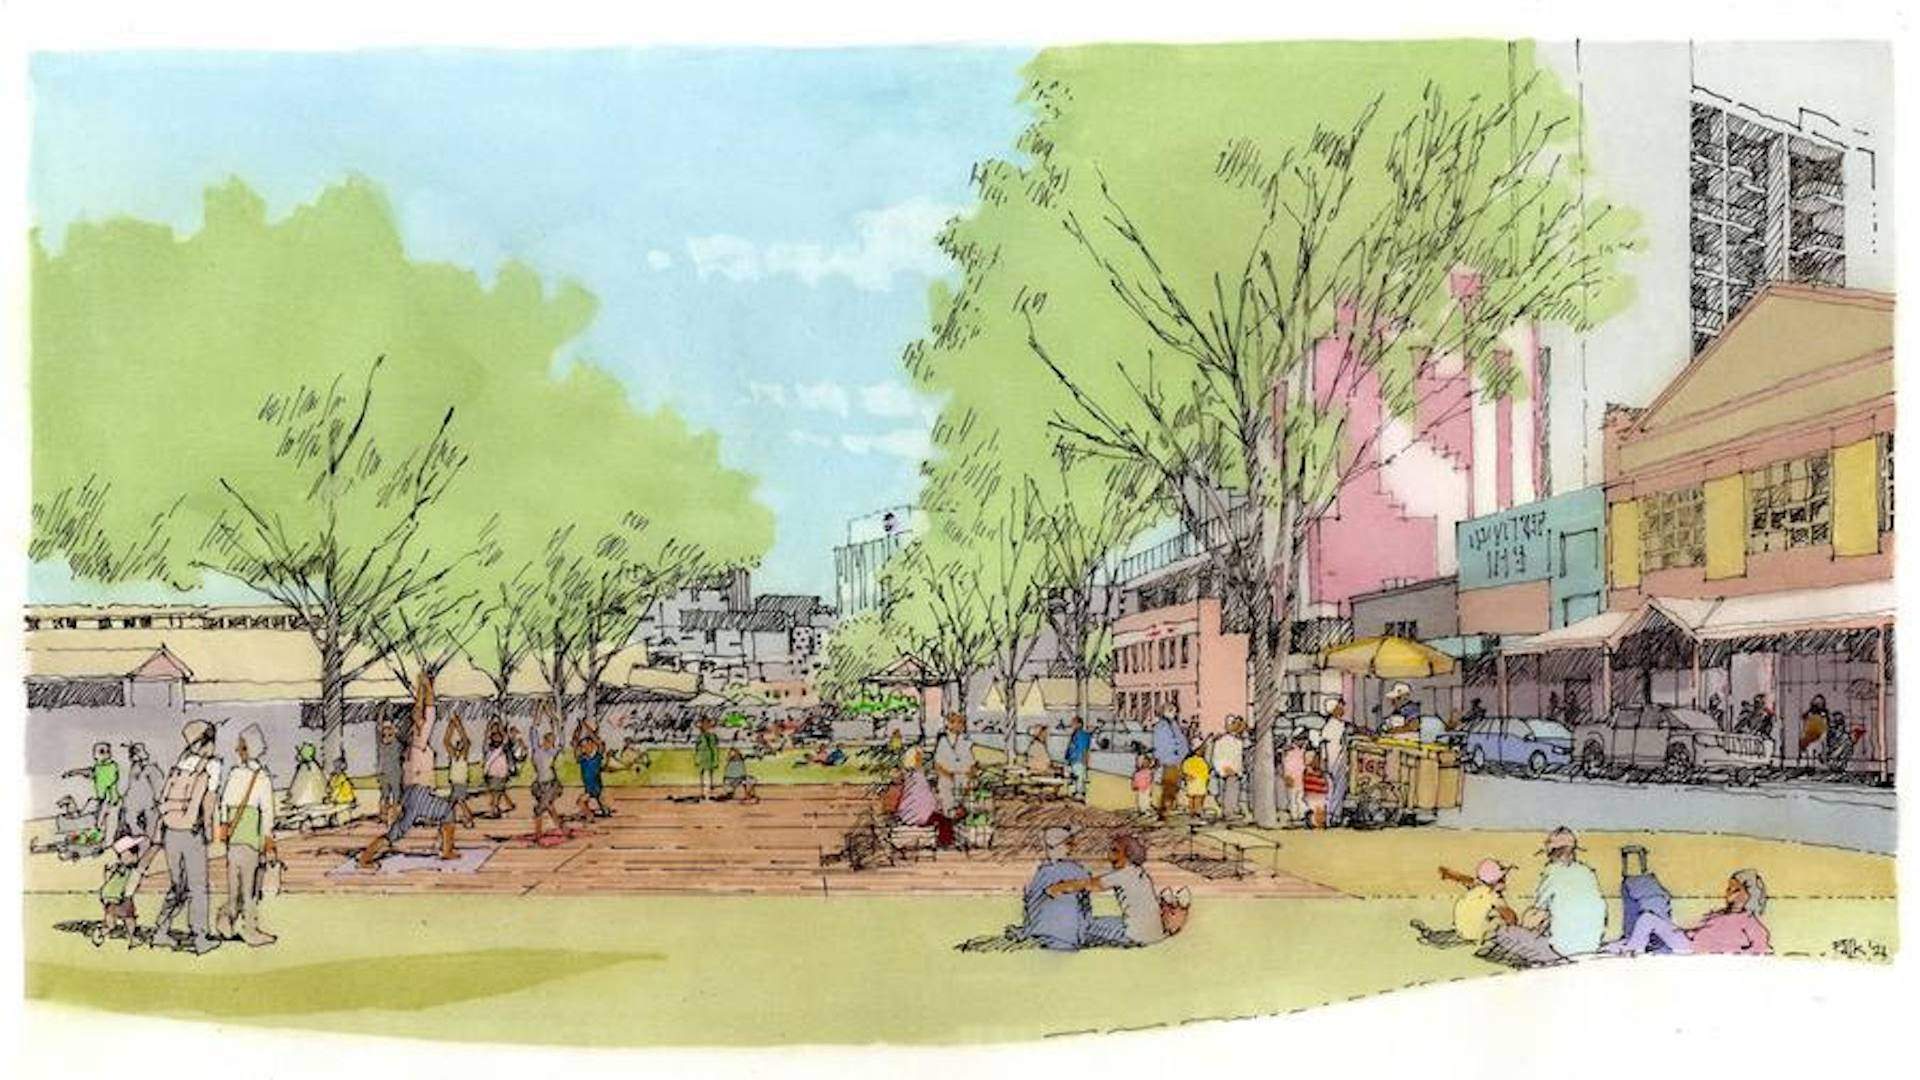 The Queen Victoria Market Is Set to Score a New Pop-Up Park and Activation Space